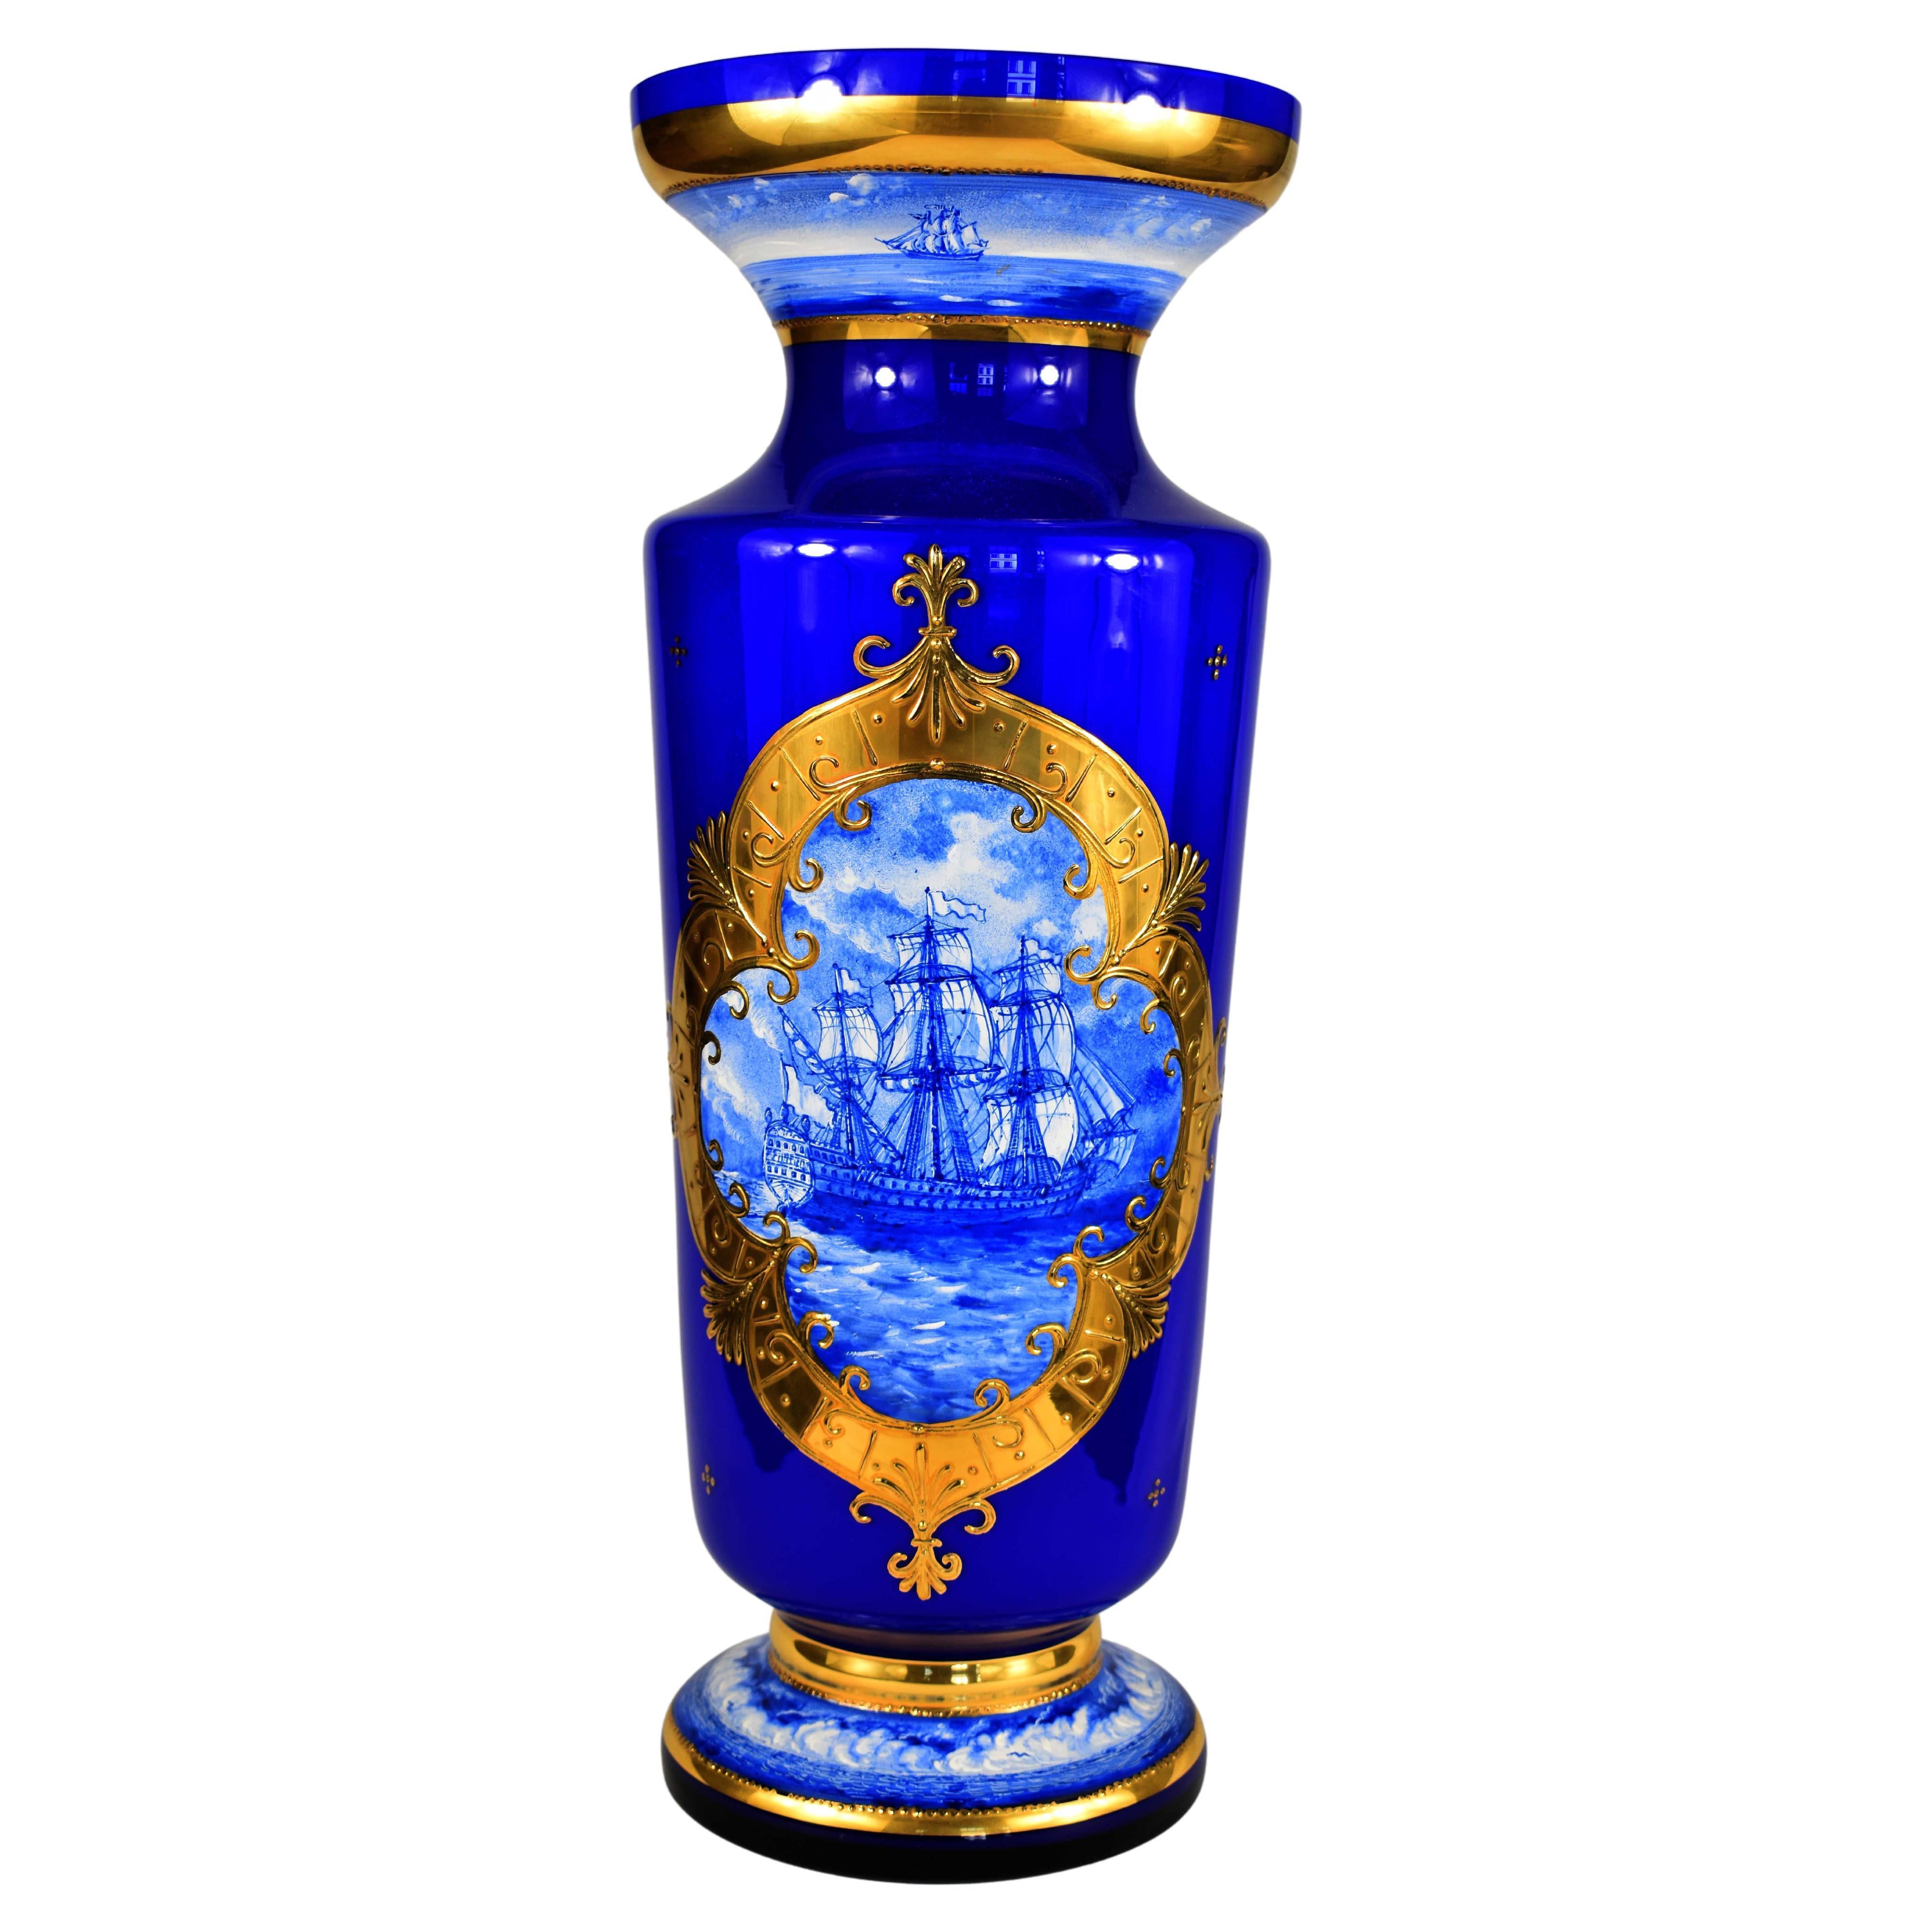 How old is cobalt blue glass?